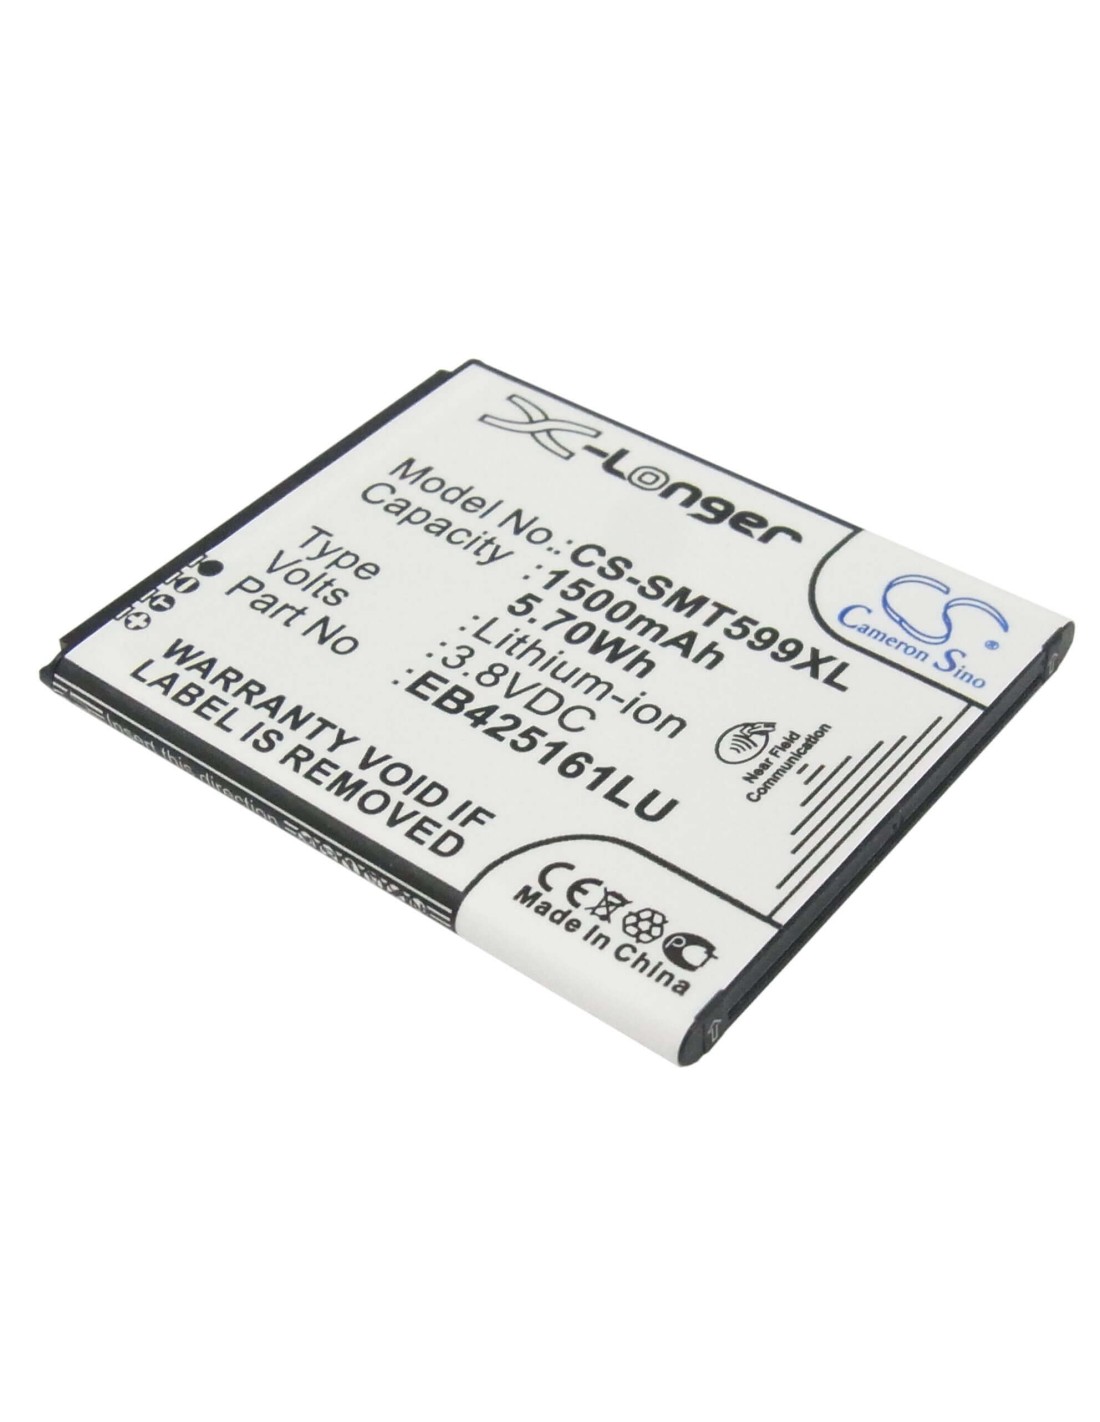 Battery for Samsung Galaxy Ace 2, GT-I8160, GT-I8160P, NFC Support 3.8V, 1500mAh - 5.70Wh